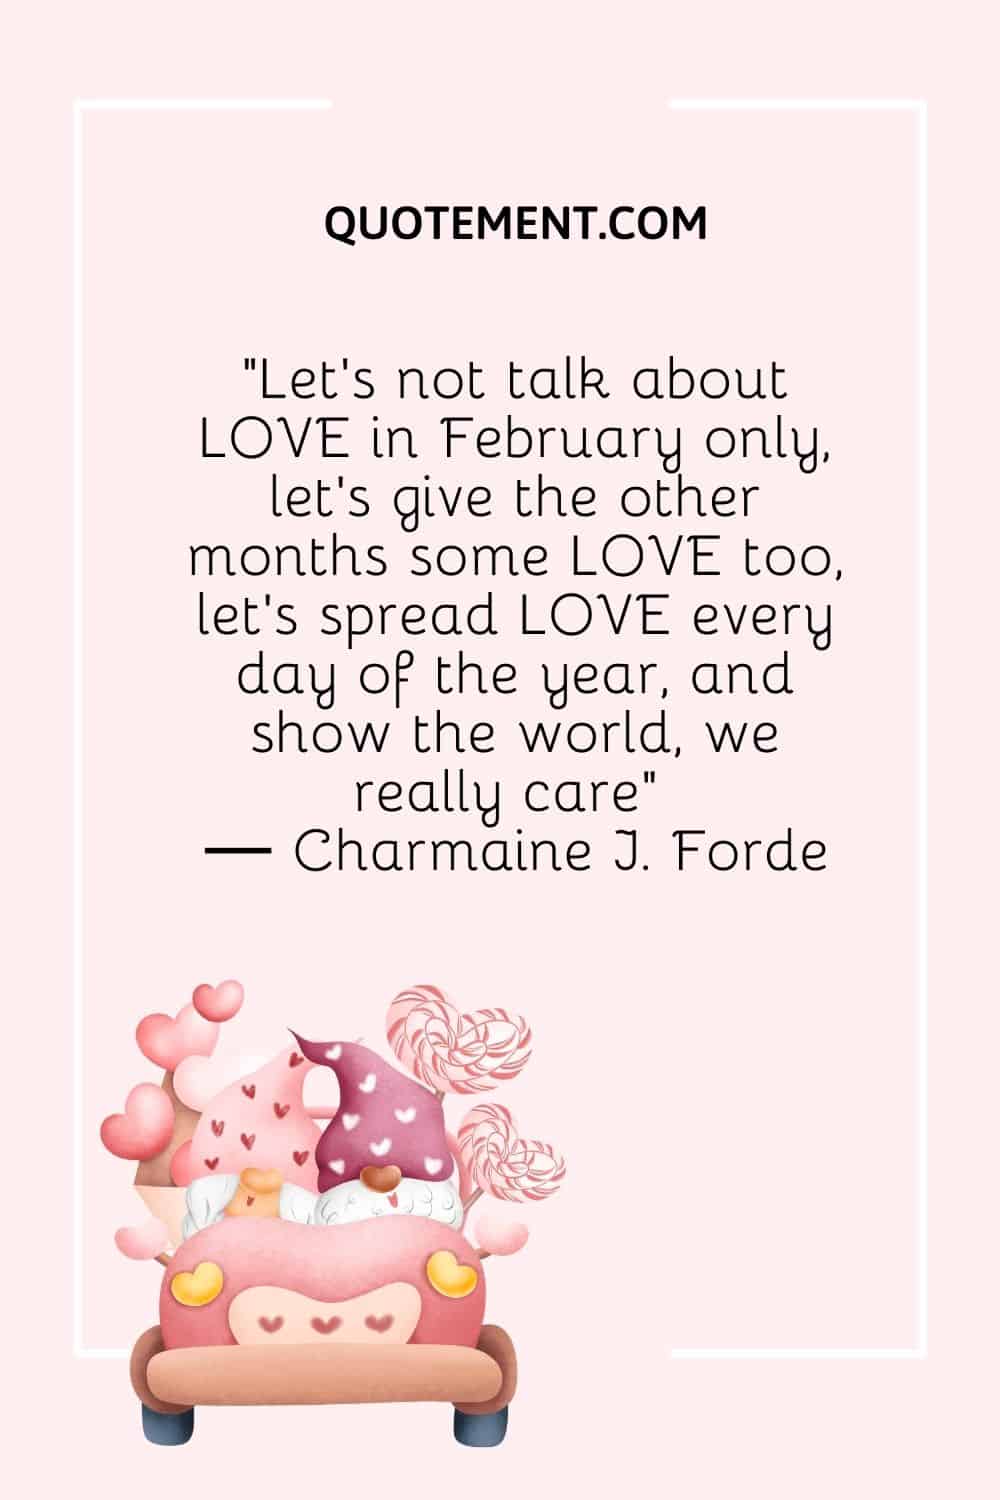 Let's not talk about LOVE in February only, let's give the other months some LOVE too, let's spread LOVE every day of the year